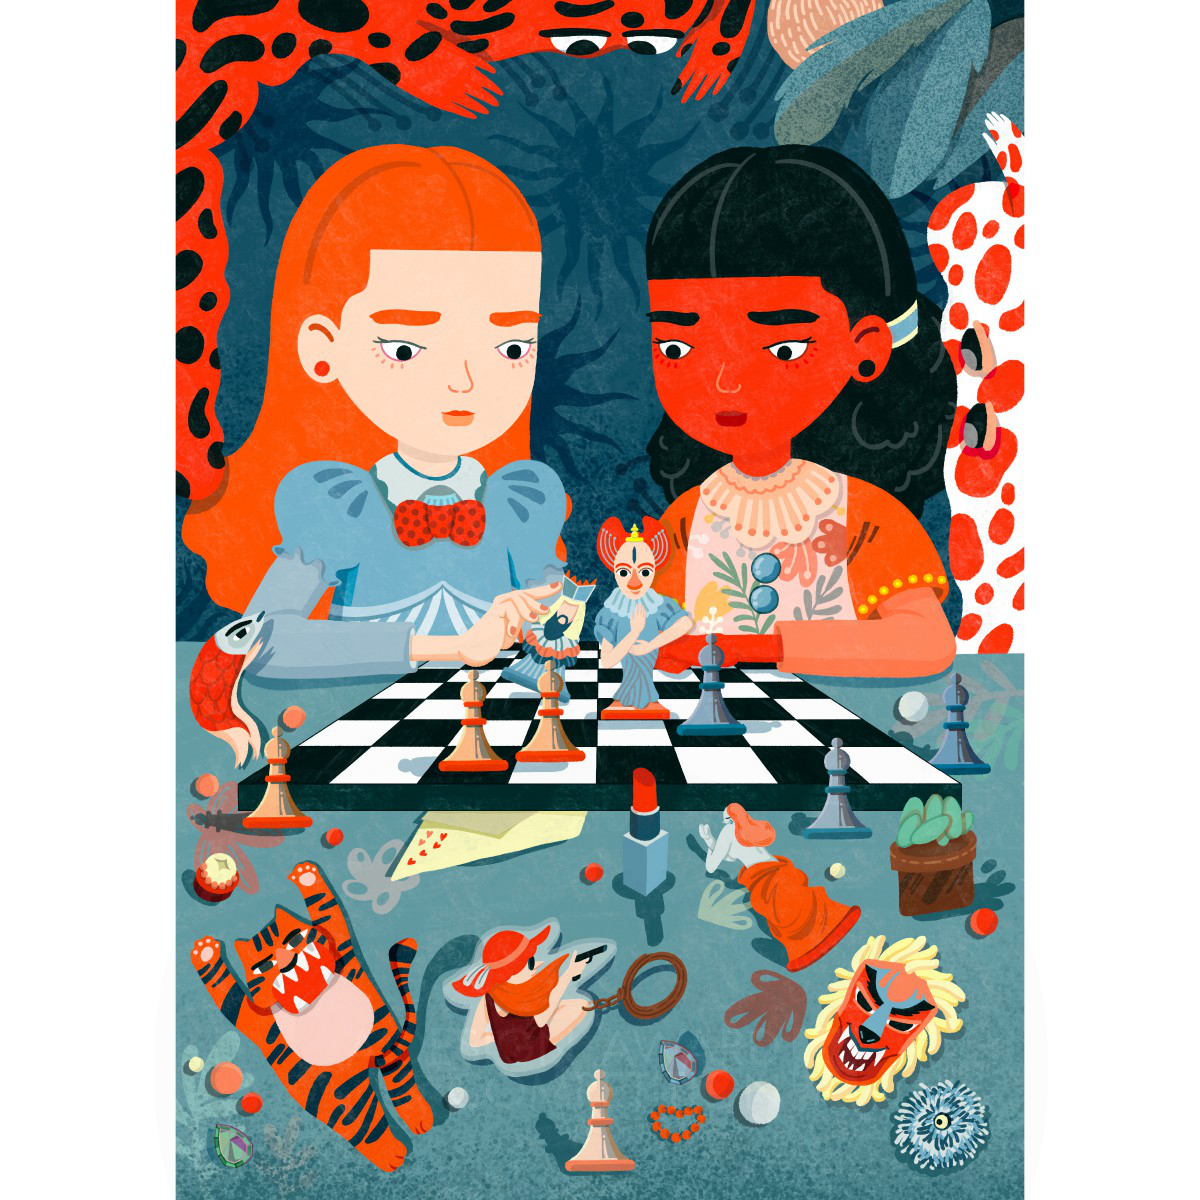 Girls with Chess Editorial Illustration